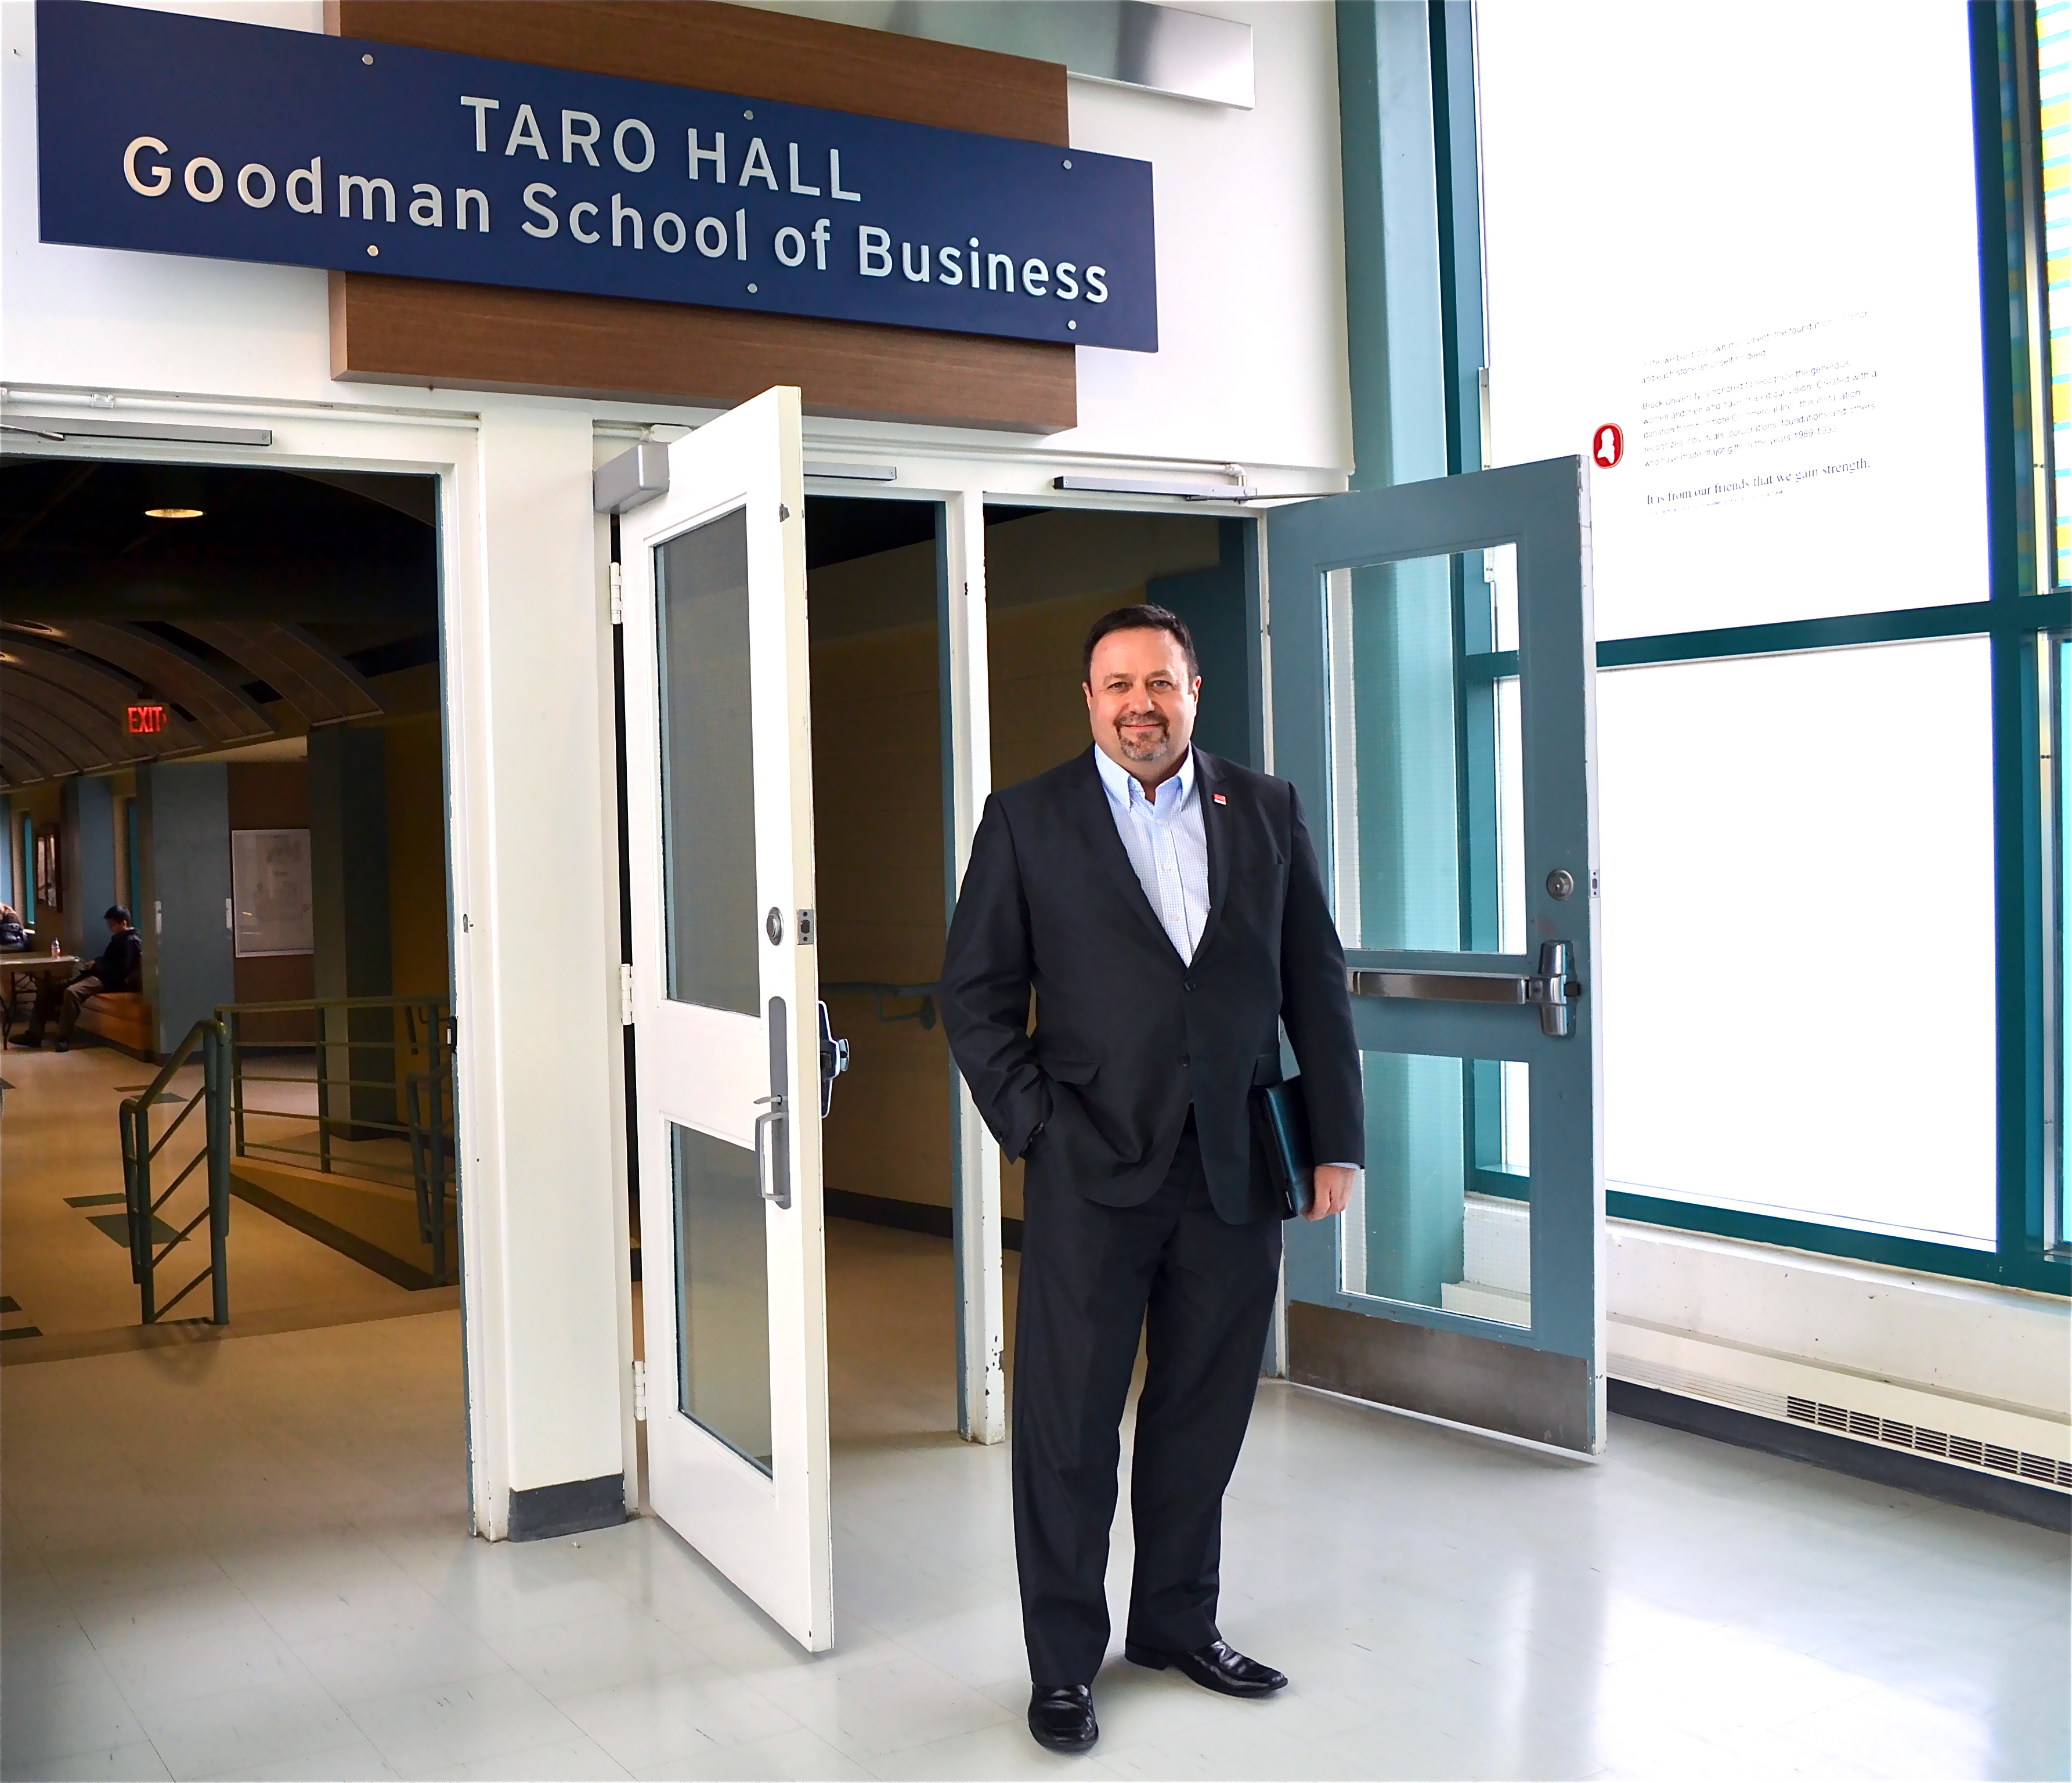 Goodman School of Business is the first in Ontario to get